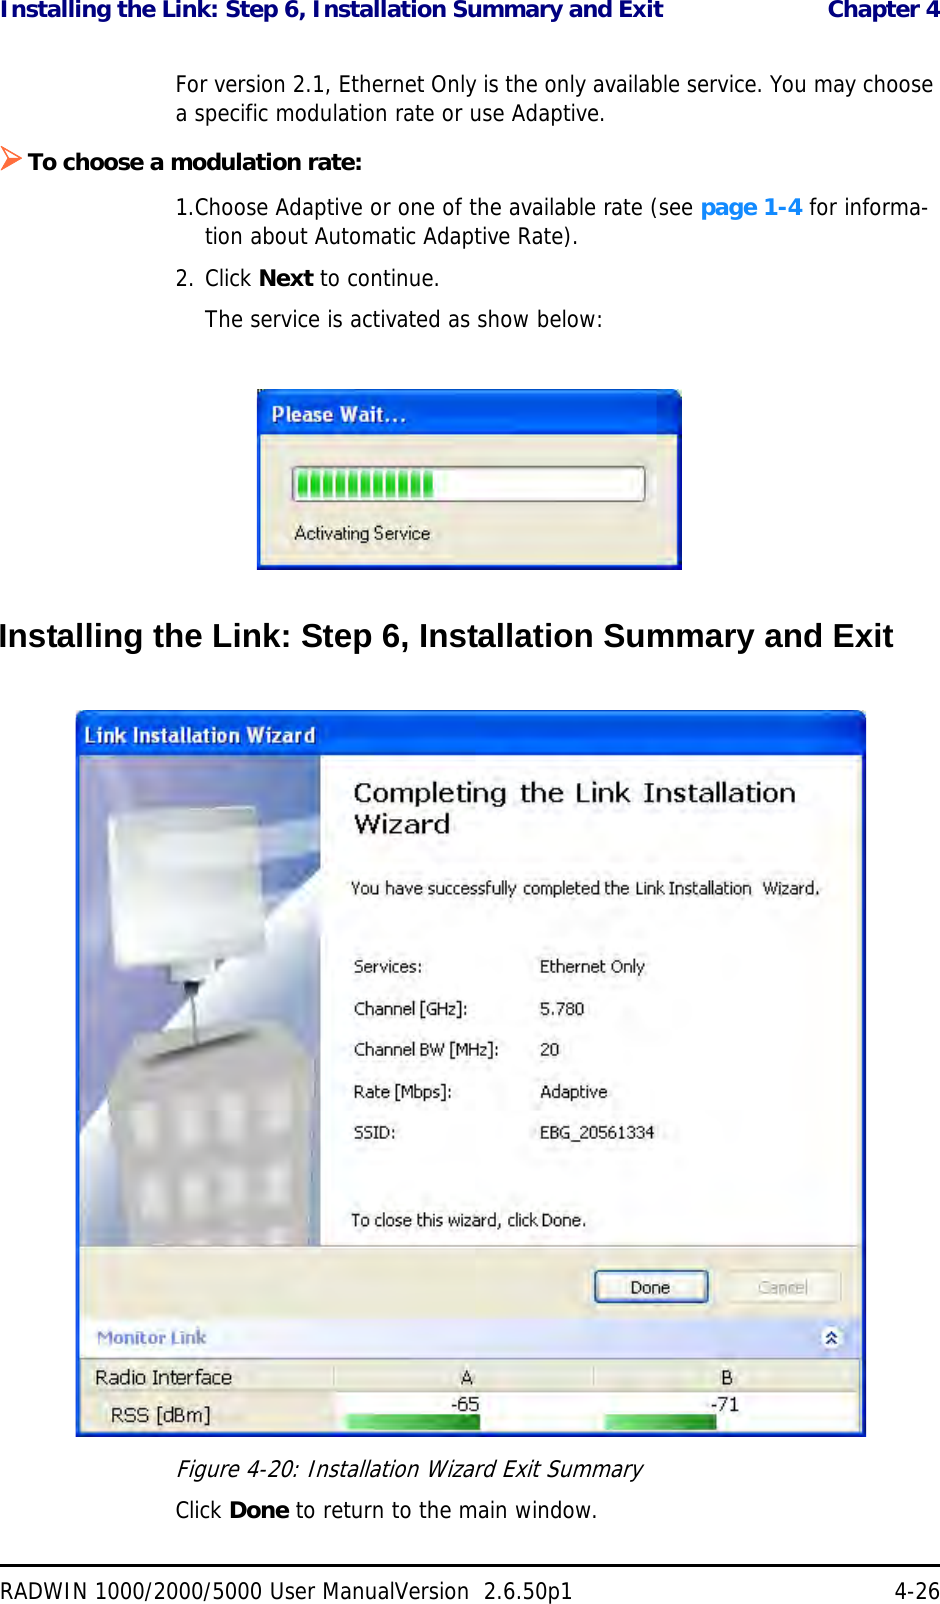 Installing the Link: Step 6, Installation Summary and Exit  Chapter 4RADWIN 1000/2000/5000 User ManualVersion  2.6.50p1 4-26For version 2.1, Ethernet Only is the only available service. You may choose a specific modulation rate or use Adaptive.To choose a modulation rate:1.Choose Adaptive or one of the available rate (see page 1-4 for informa-tion about Automatic Adaptive Rate).2. Click Next to continue.The service is activated as show below:Installing the Link: Step 6, Installation Summary and ExitFigure 4-20: Installation Wizard Exit Summary Click Done to return to the main window.